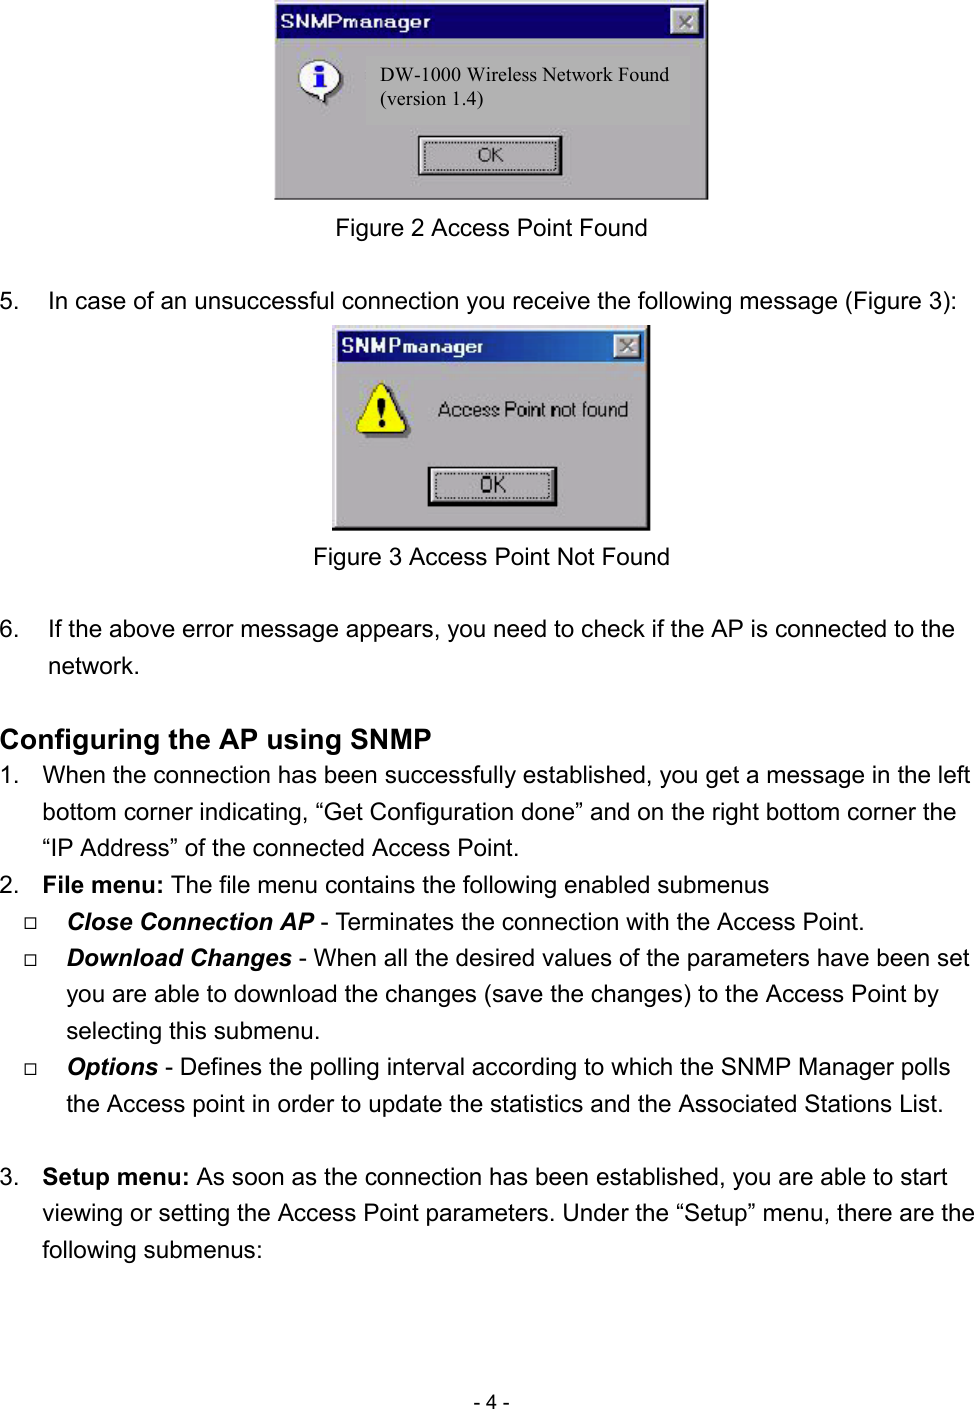 - 4 -  DW-1000 Wireless Network Found (version 1.4)  Figure 2 Access Point Found  5.  In case of an unsuccessful connection you receive the following message (Figure 3):  Figure 3 Access Point Not Found  6.  If the above error message appears, you need to check if the AP is connected to the network.  Configuring the AP using SNMP 1.  When the connection has been successfully established, you get a message in the left bottom corner indicating, “Get Configuration done” and on the right bottom corner the “IP Address” of the connected Access Point. 2.  File menu: The file menu contains the following enabled submenus   Close Connection AP - Terminates the connection with the Access Point.   Download Changes - When all the desired values of the parameters have been set you are able to download the changes (save the changes) to the Access Point by selecting this submenu.   Options - Defines the polling interval according to which the SNMP Manager polls the Access point in order to update the statistics and the Associated Stations List.  3.  Setup menu: As soon as the connection has been established, you are able to start viewing or setting the Access Point parameters. Under the “Setup” menu, there are the following submenus: 